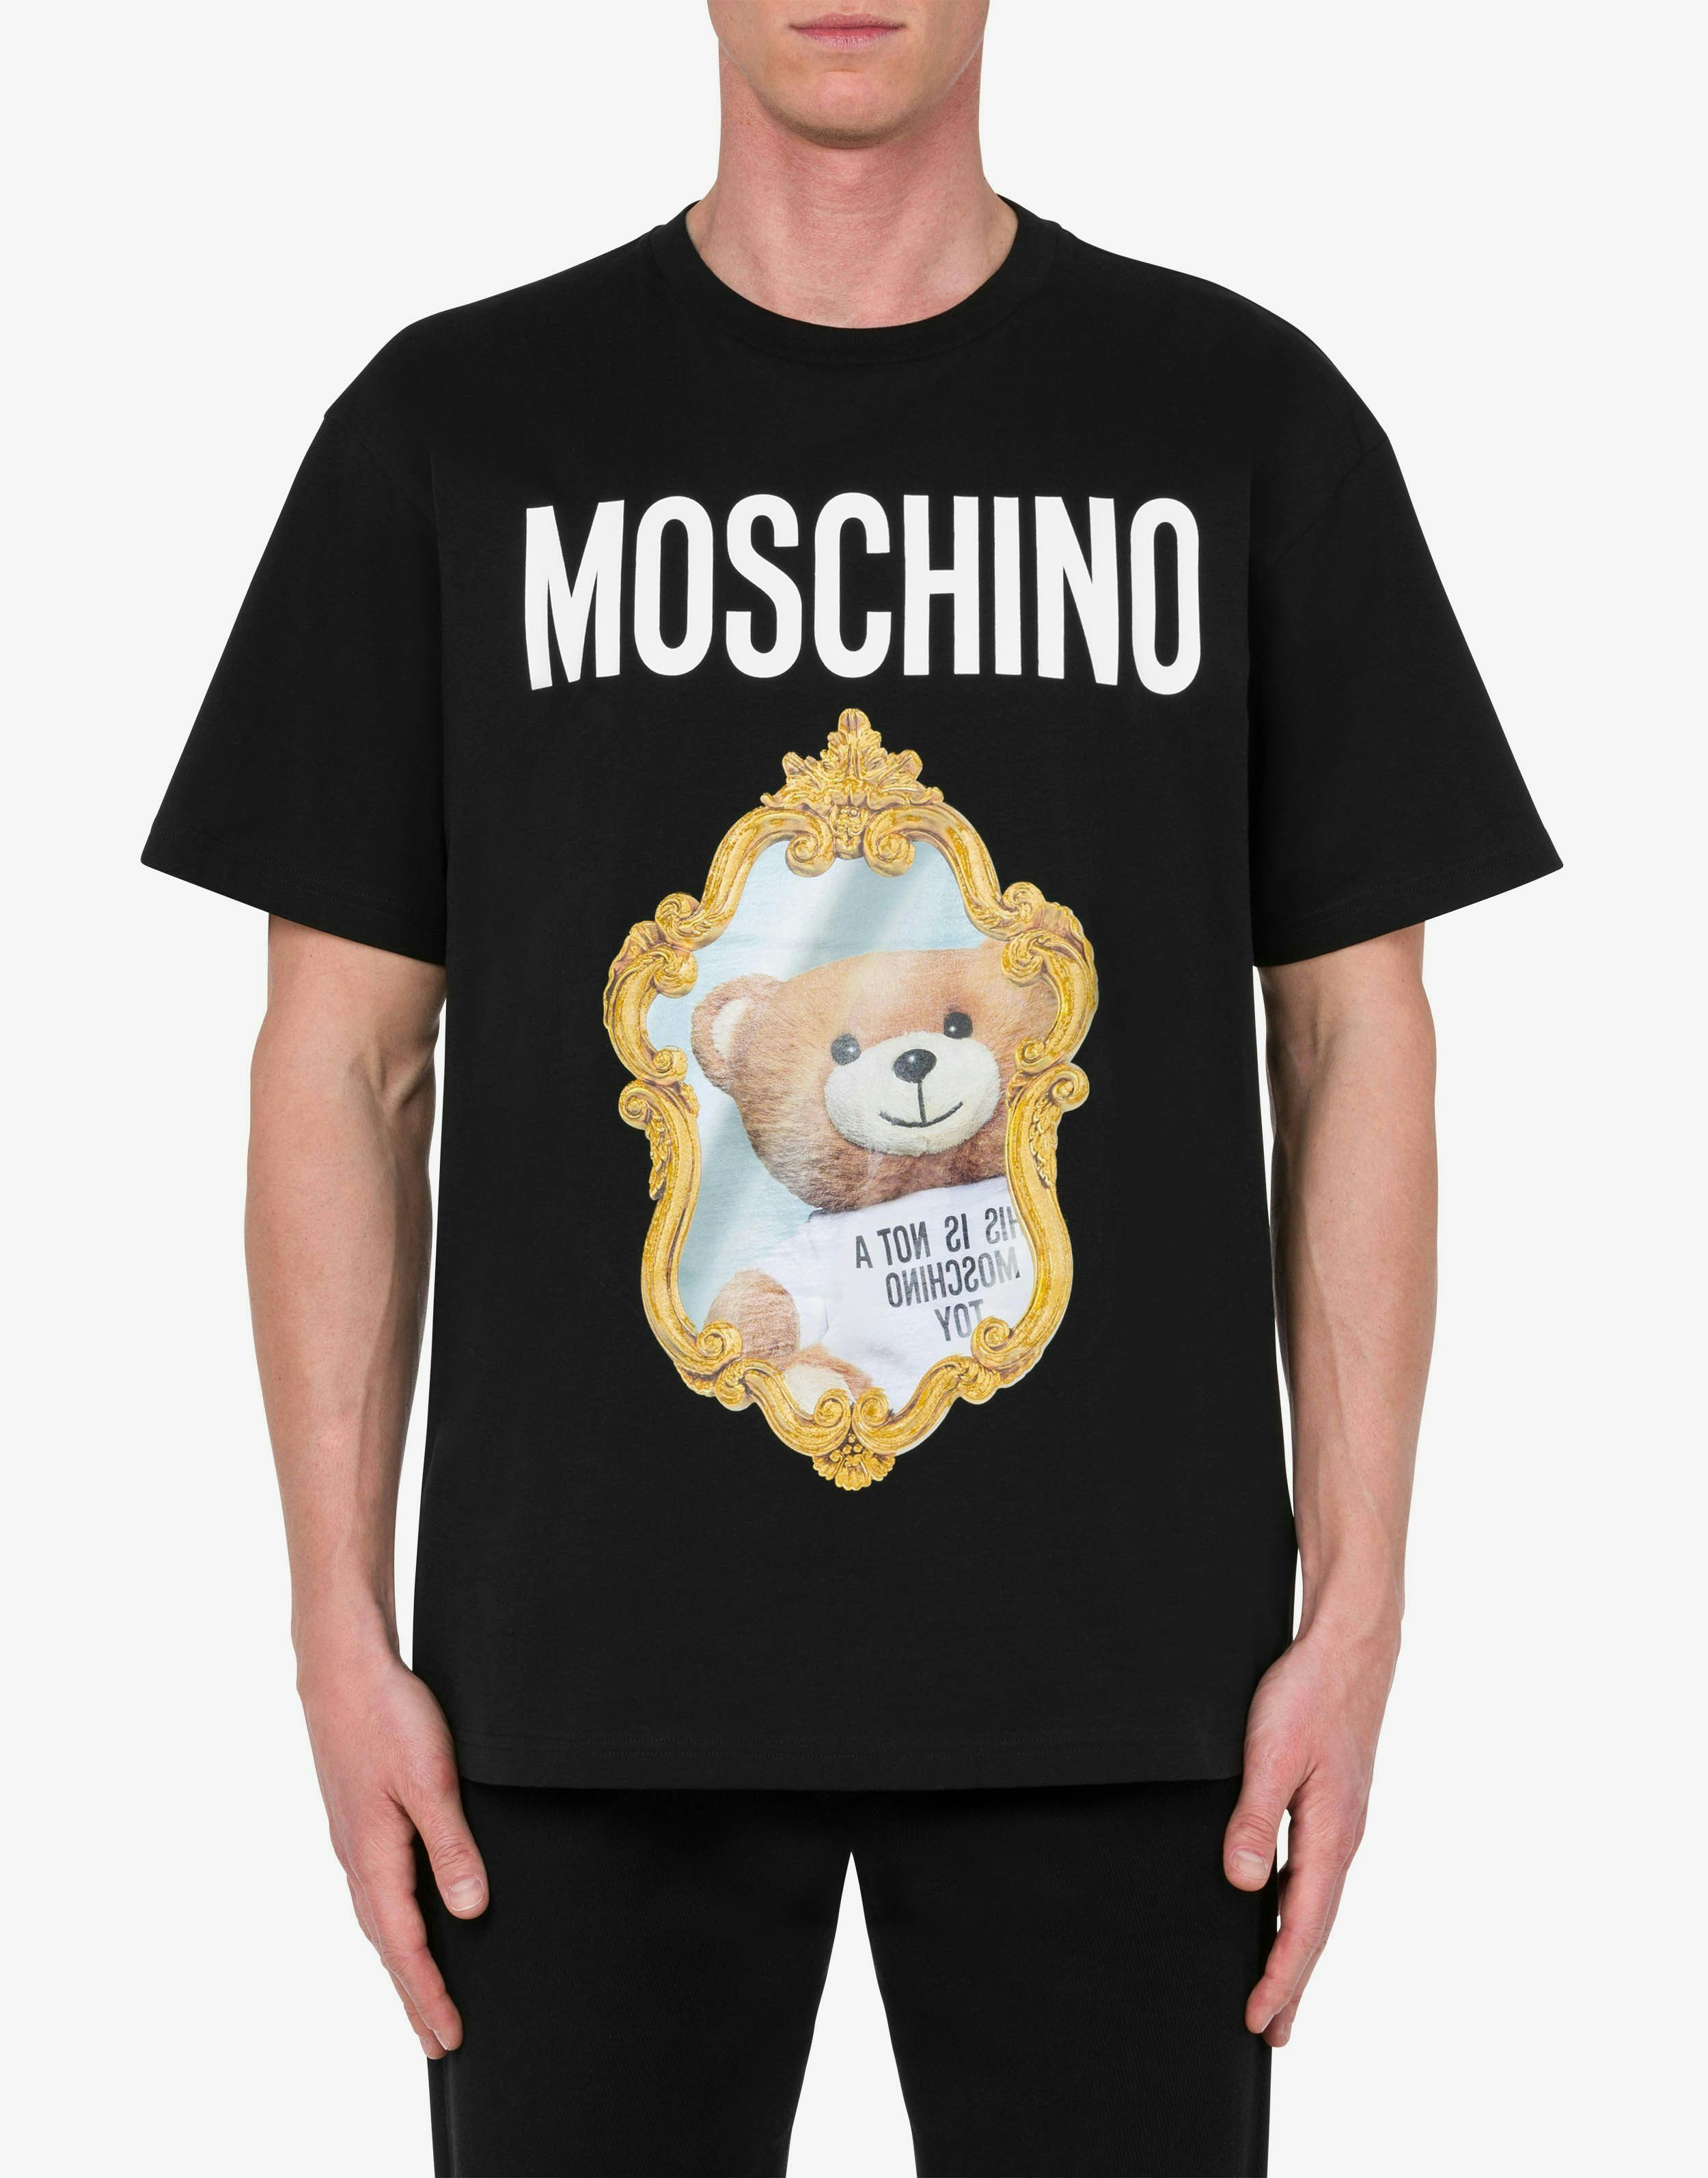 MOSCHINOMoschino Homme T-Shirt 100 % CO A1903 2327 Marque  